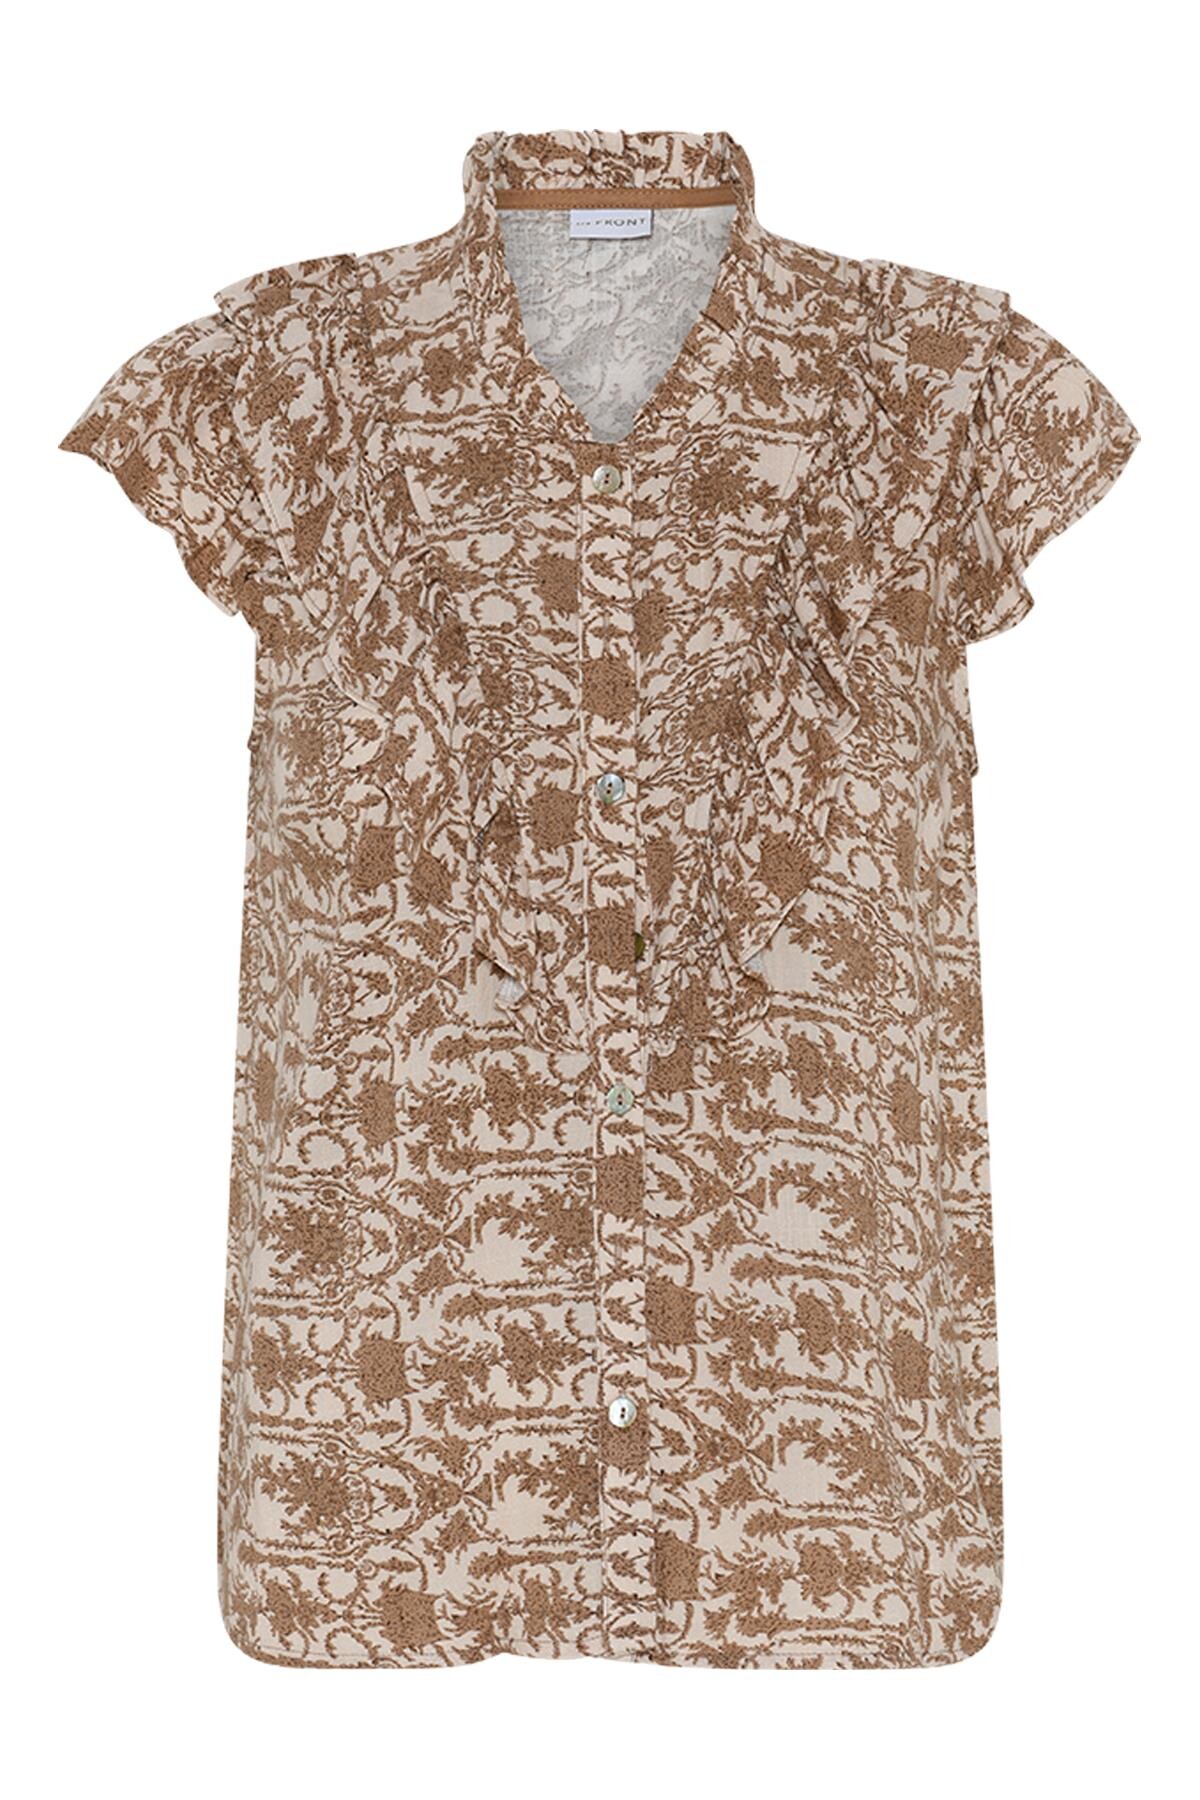 IN FRONT RIANA SHIRT 16324 191 (Sand 191)